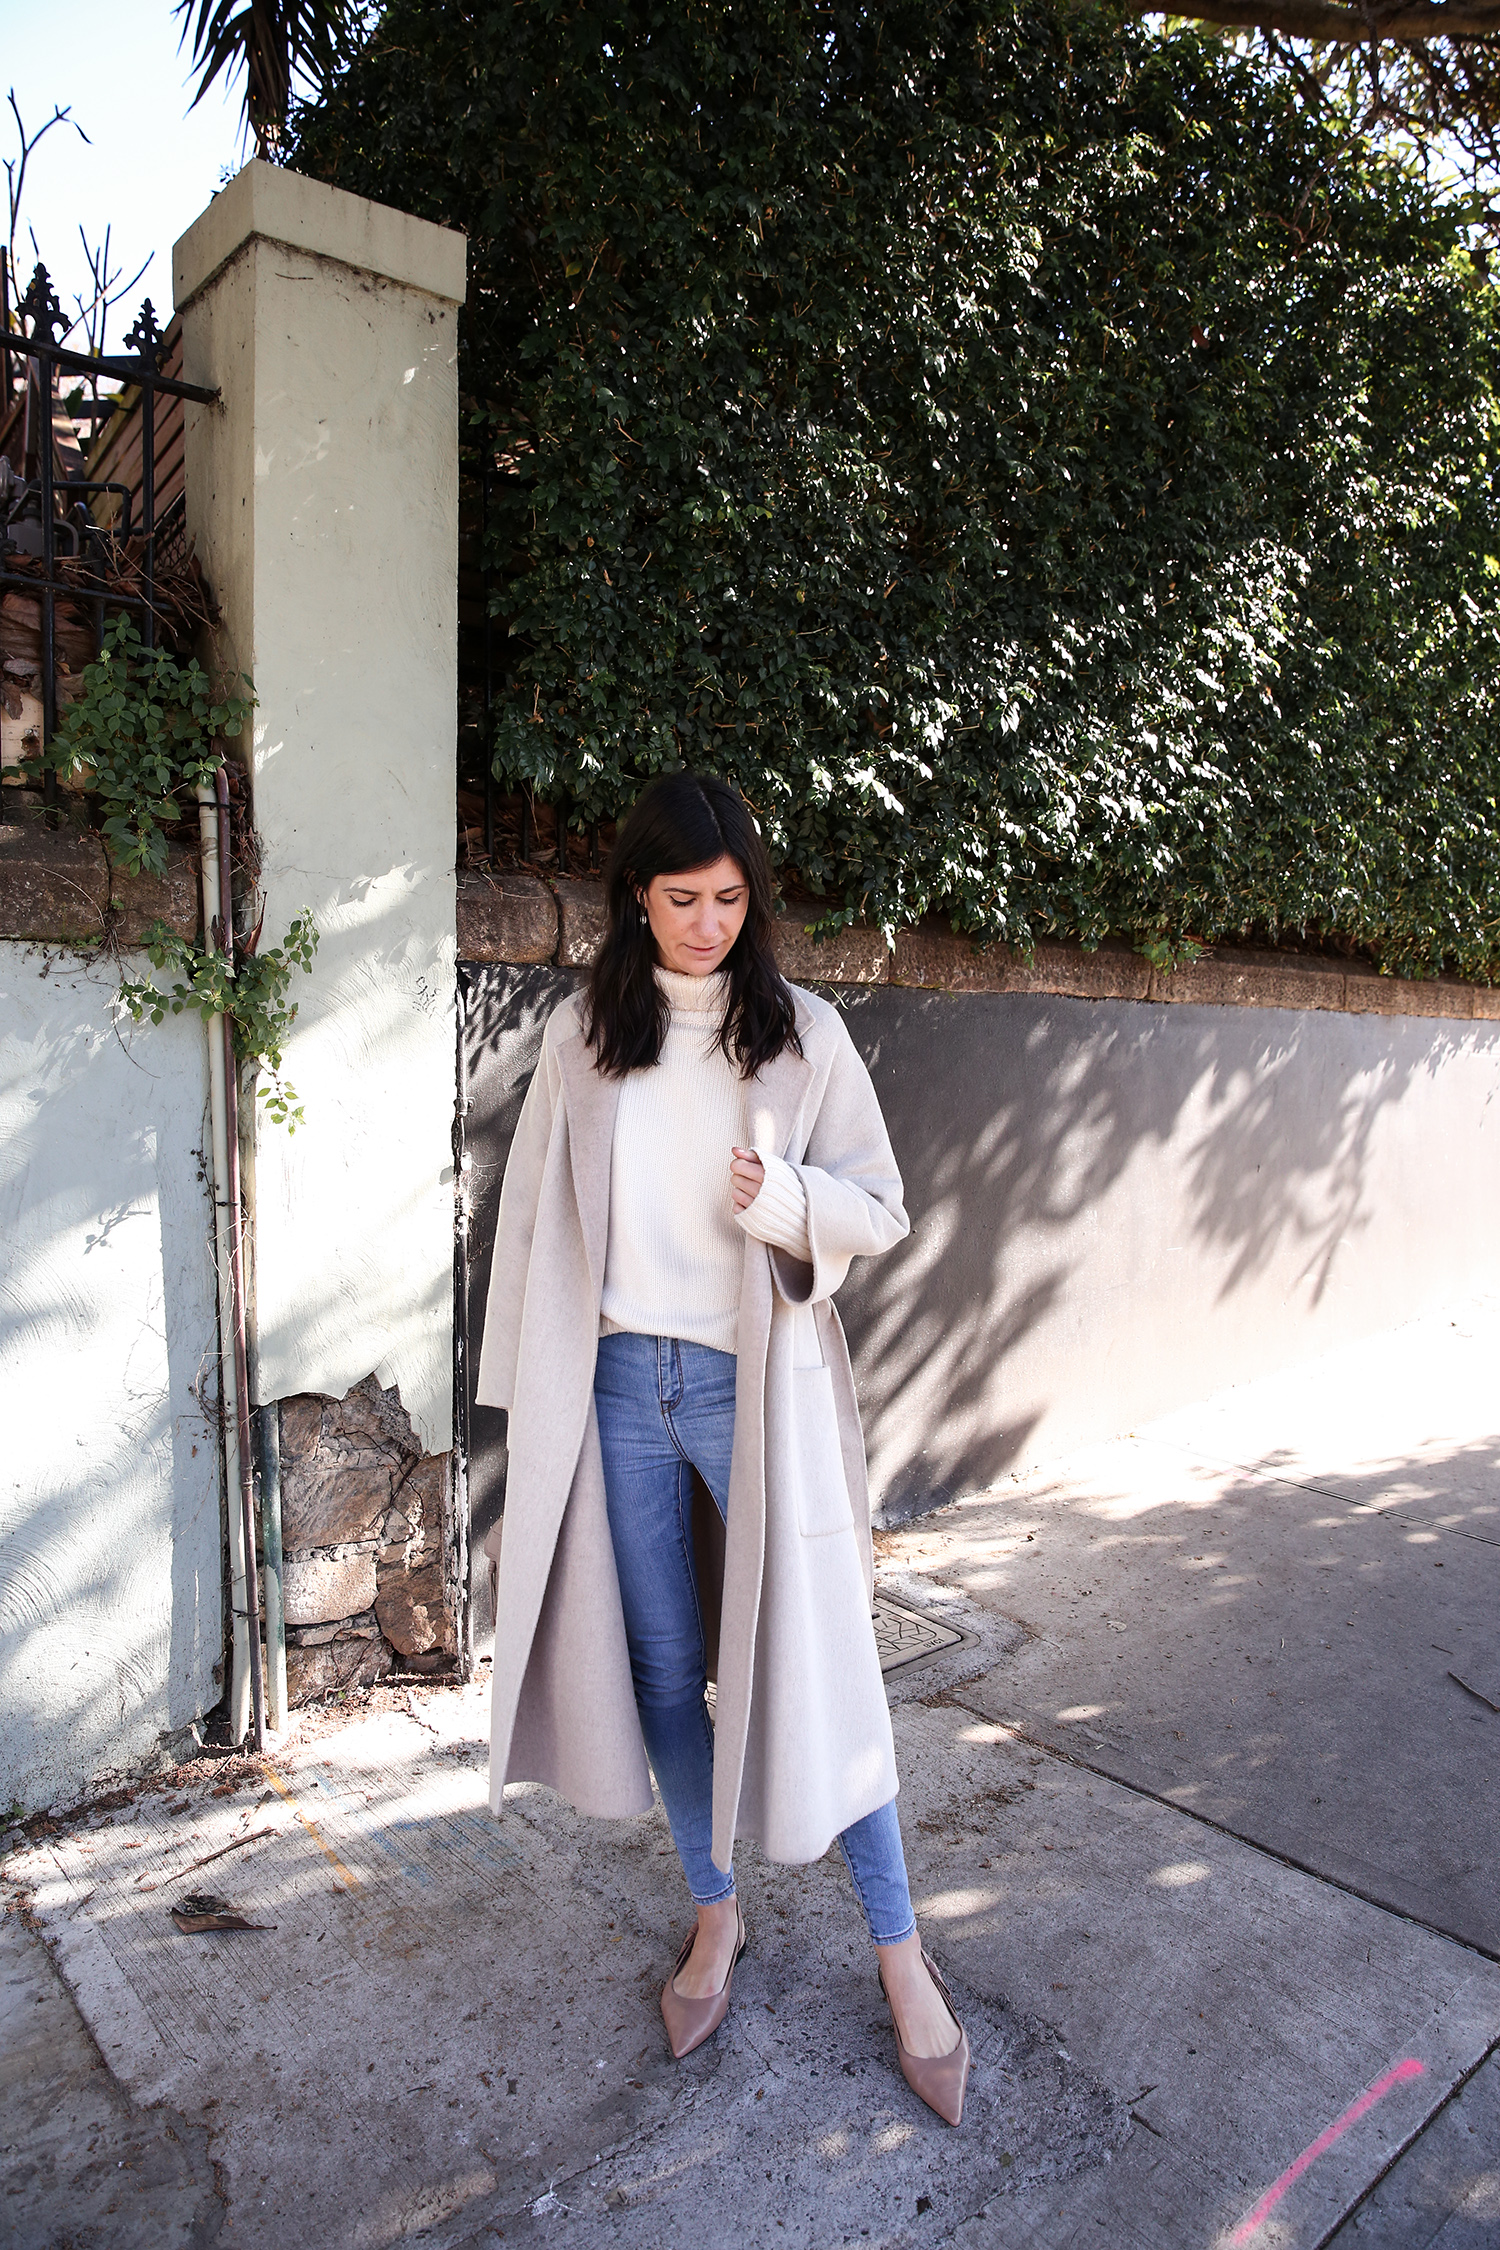 Scandi style outfit wearing white rollneck sweater skinny jeans and a duster coat